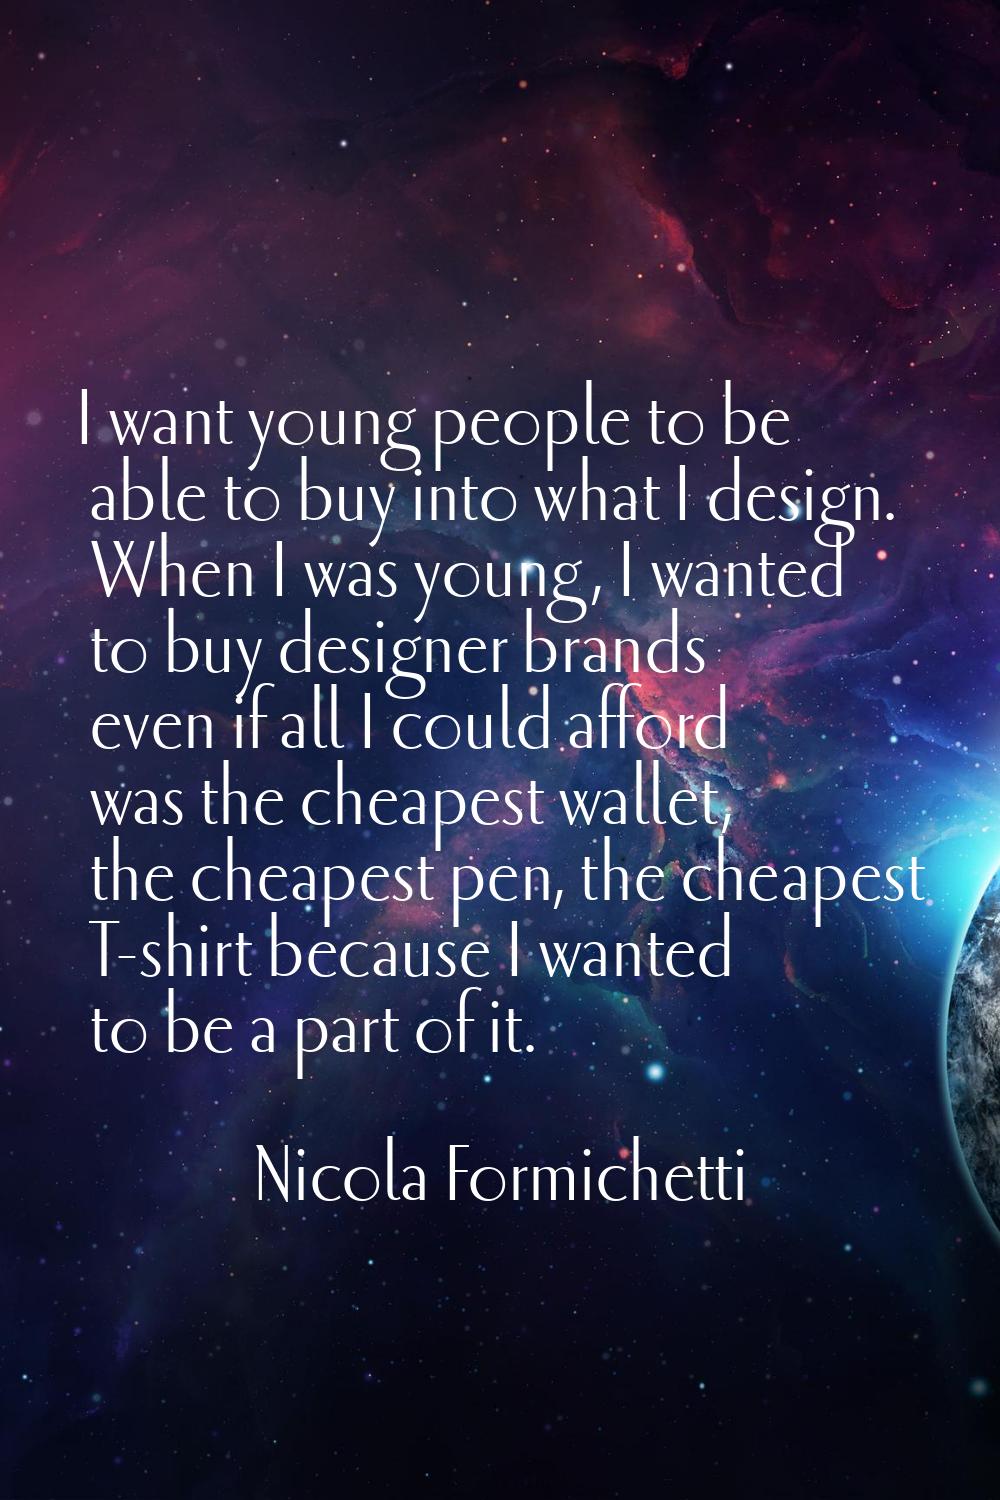 I want young people to be able to buy into what I design. When I was young, I wanted to buy designe